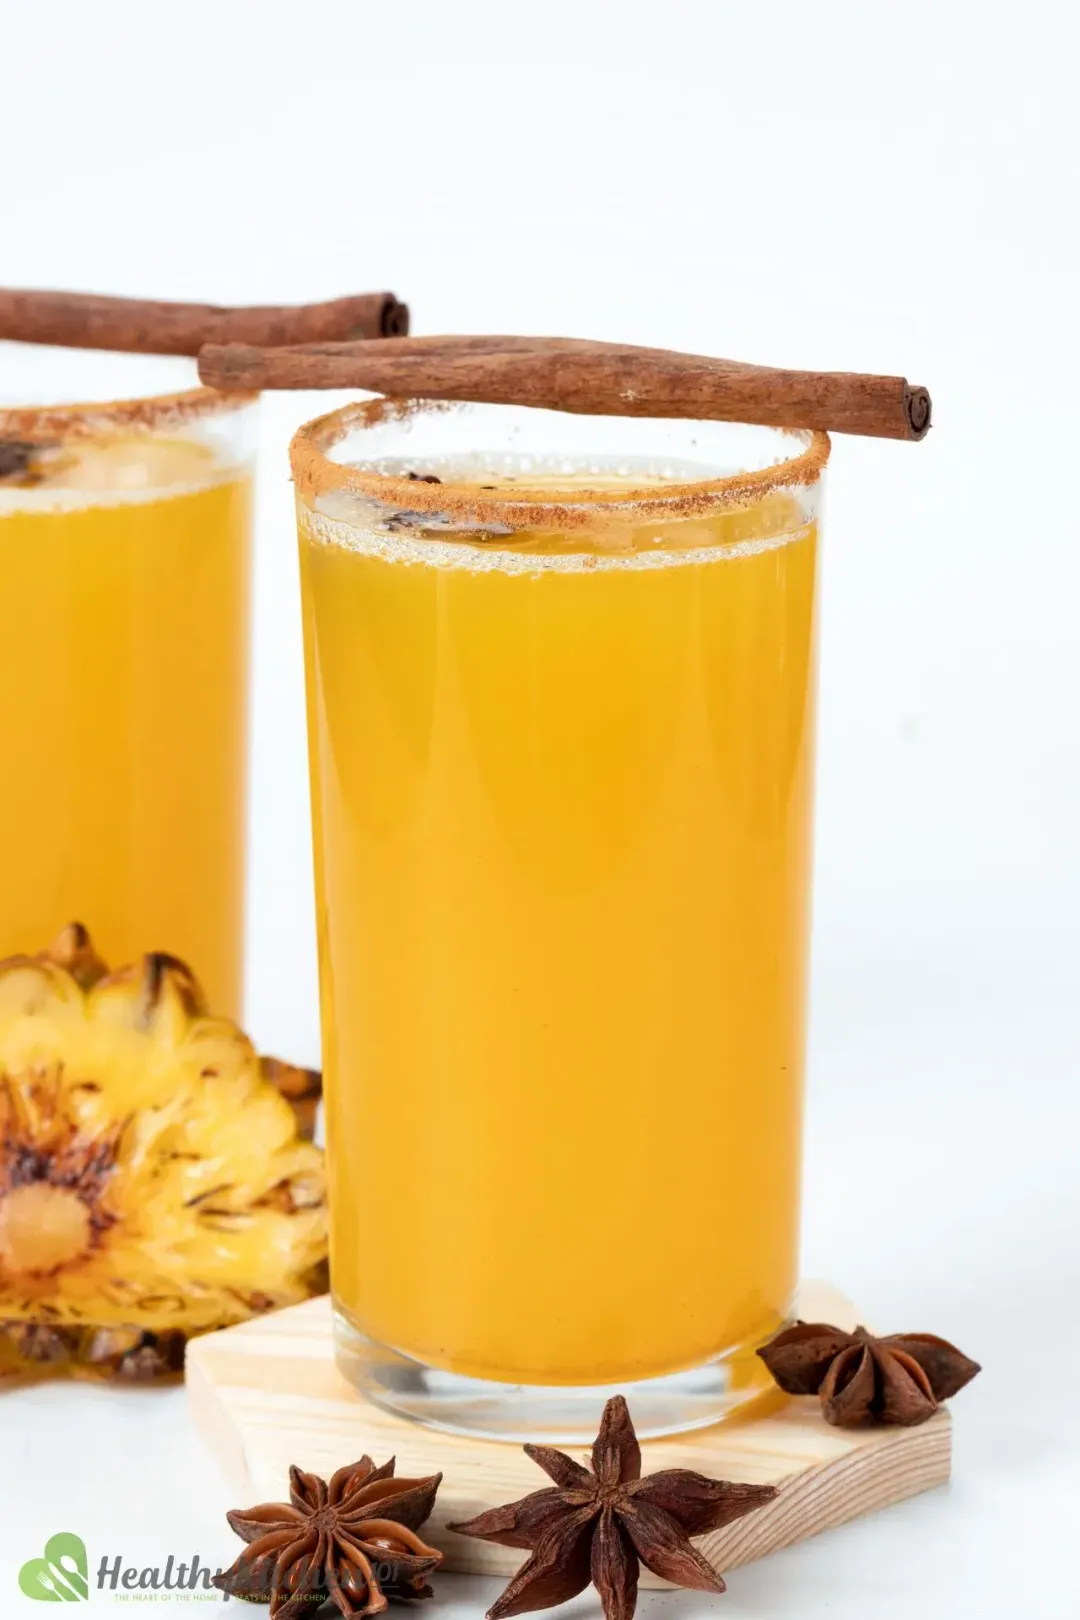 What to Mix with Pineapple and Rum